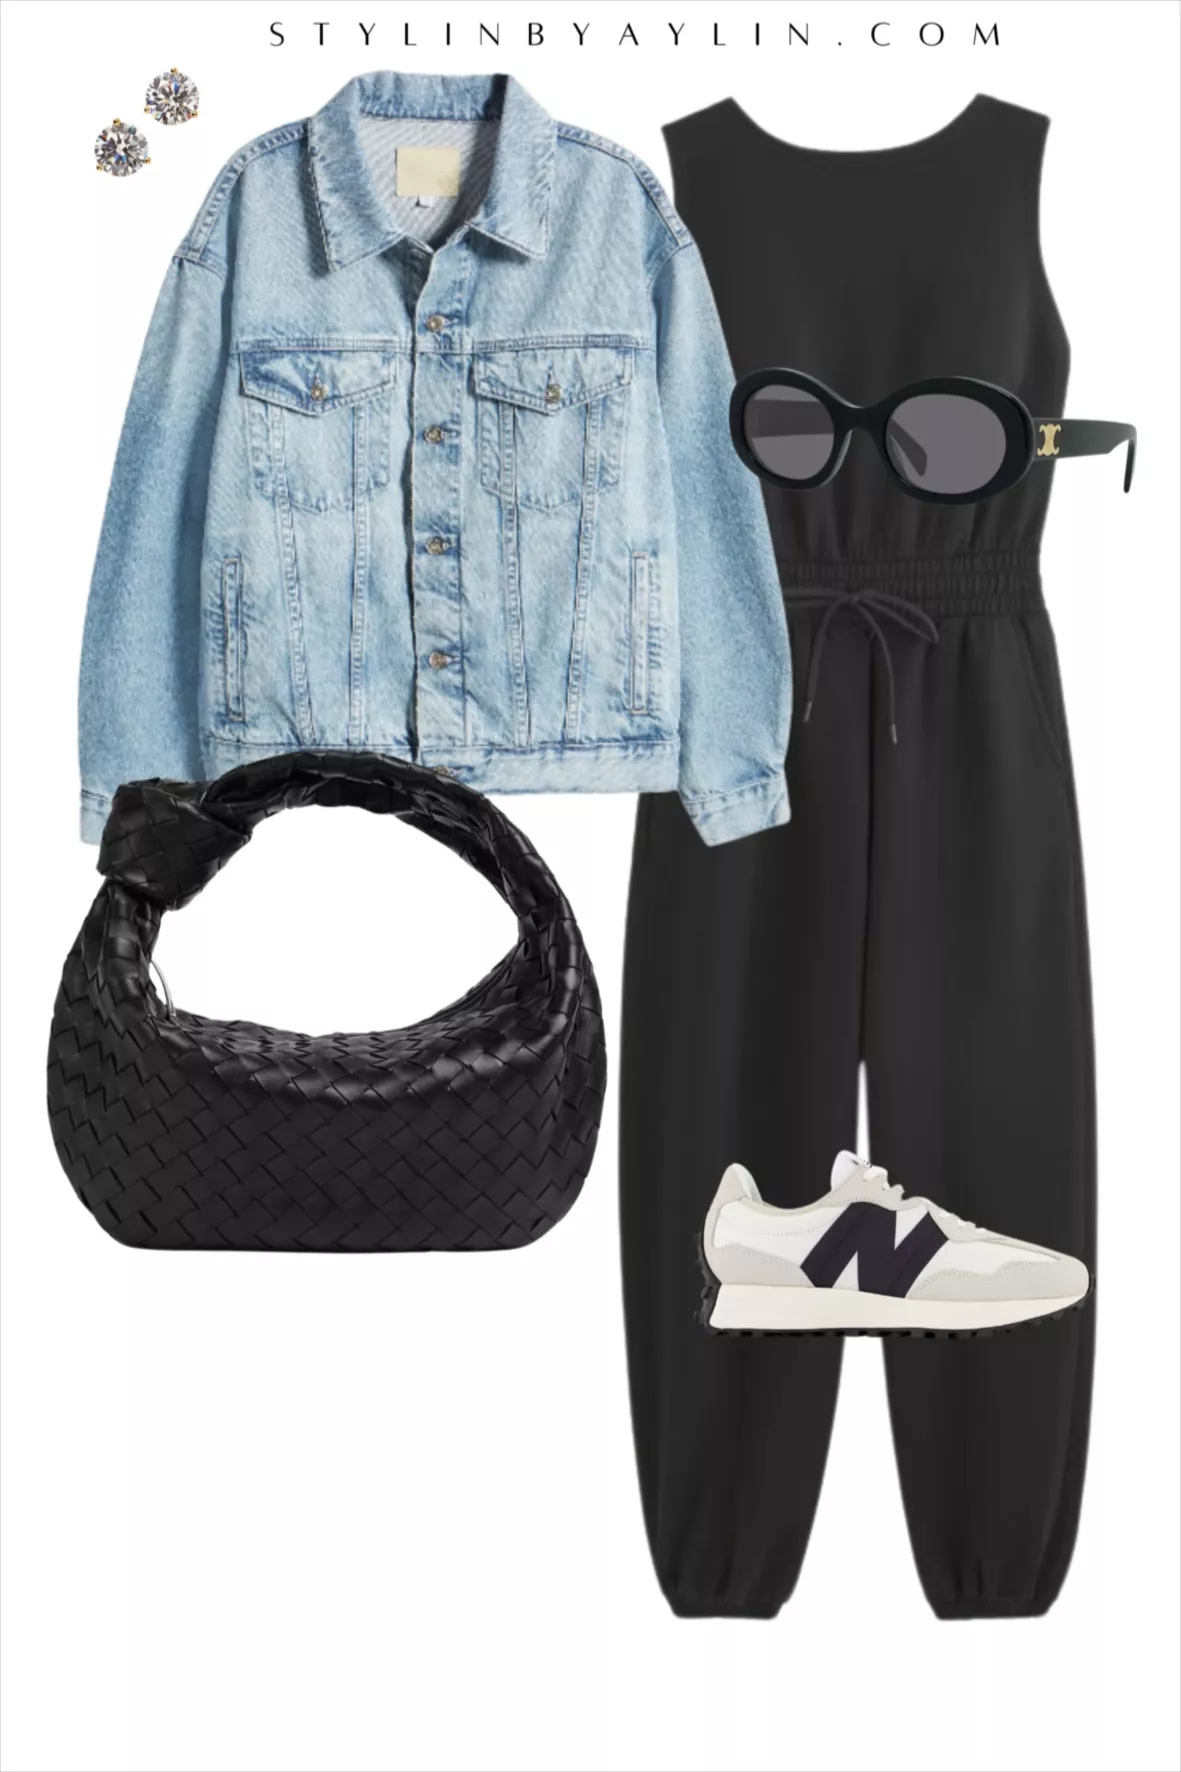 TRAVEL outfit - Stylin by Aylin